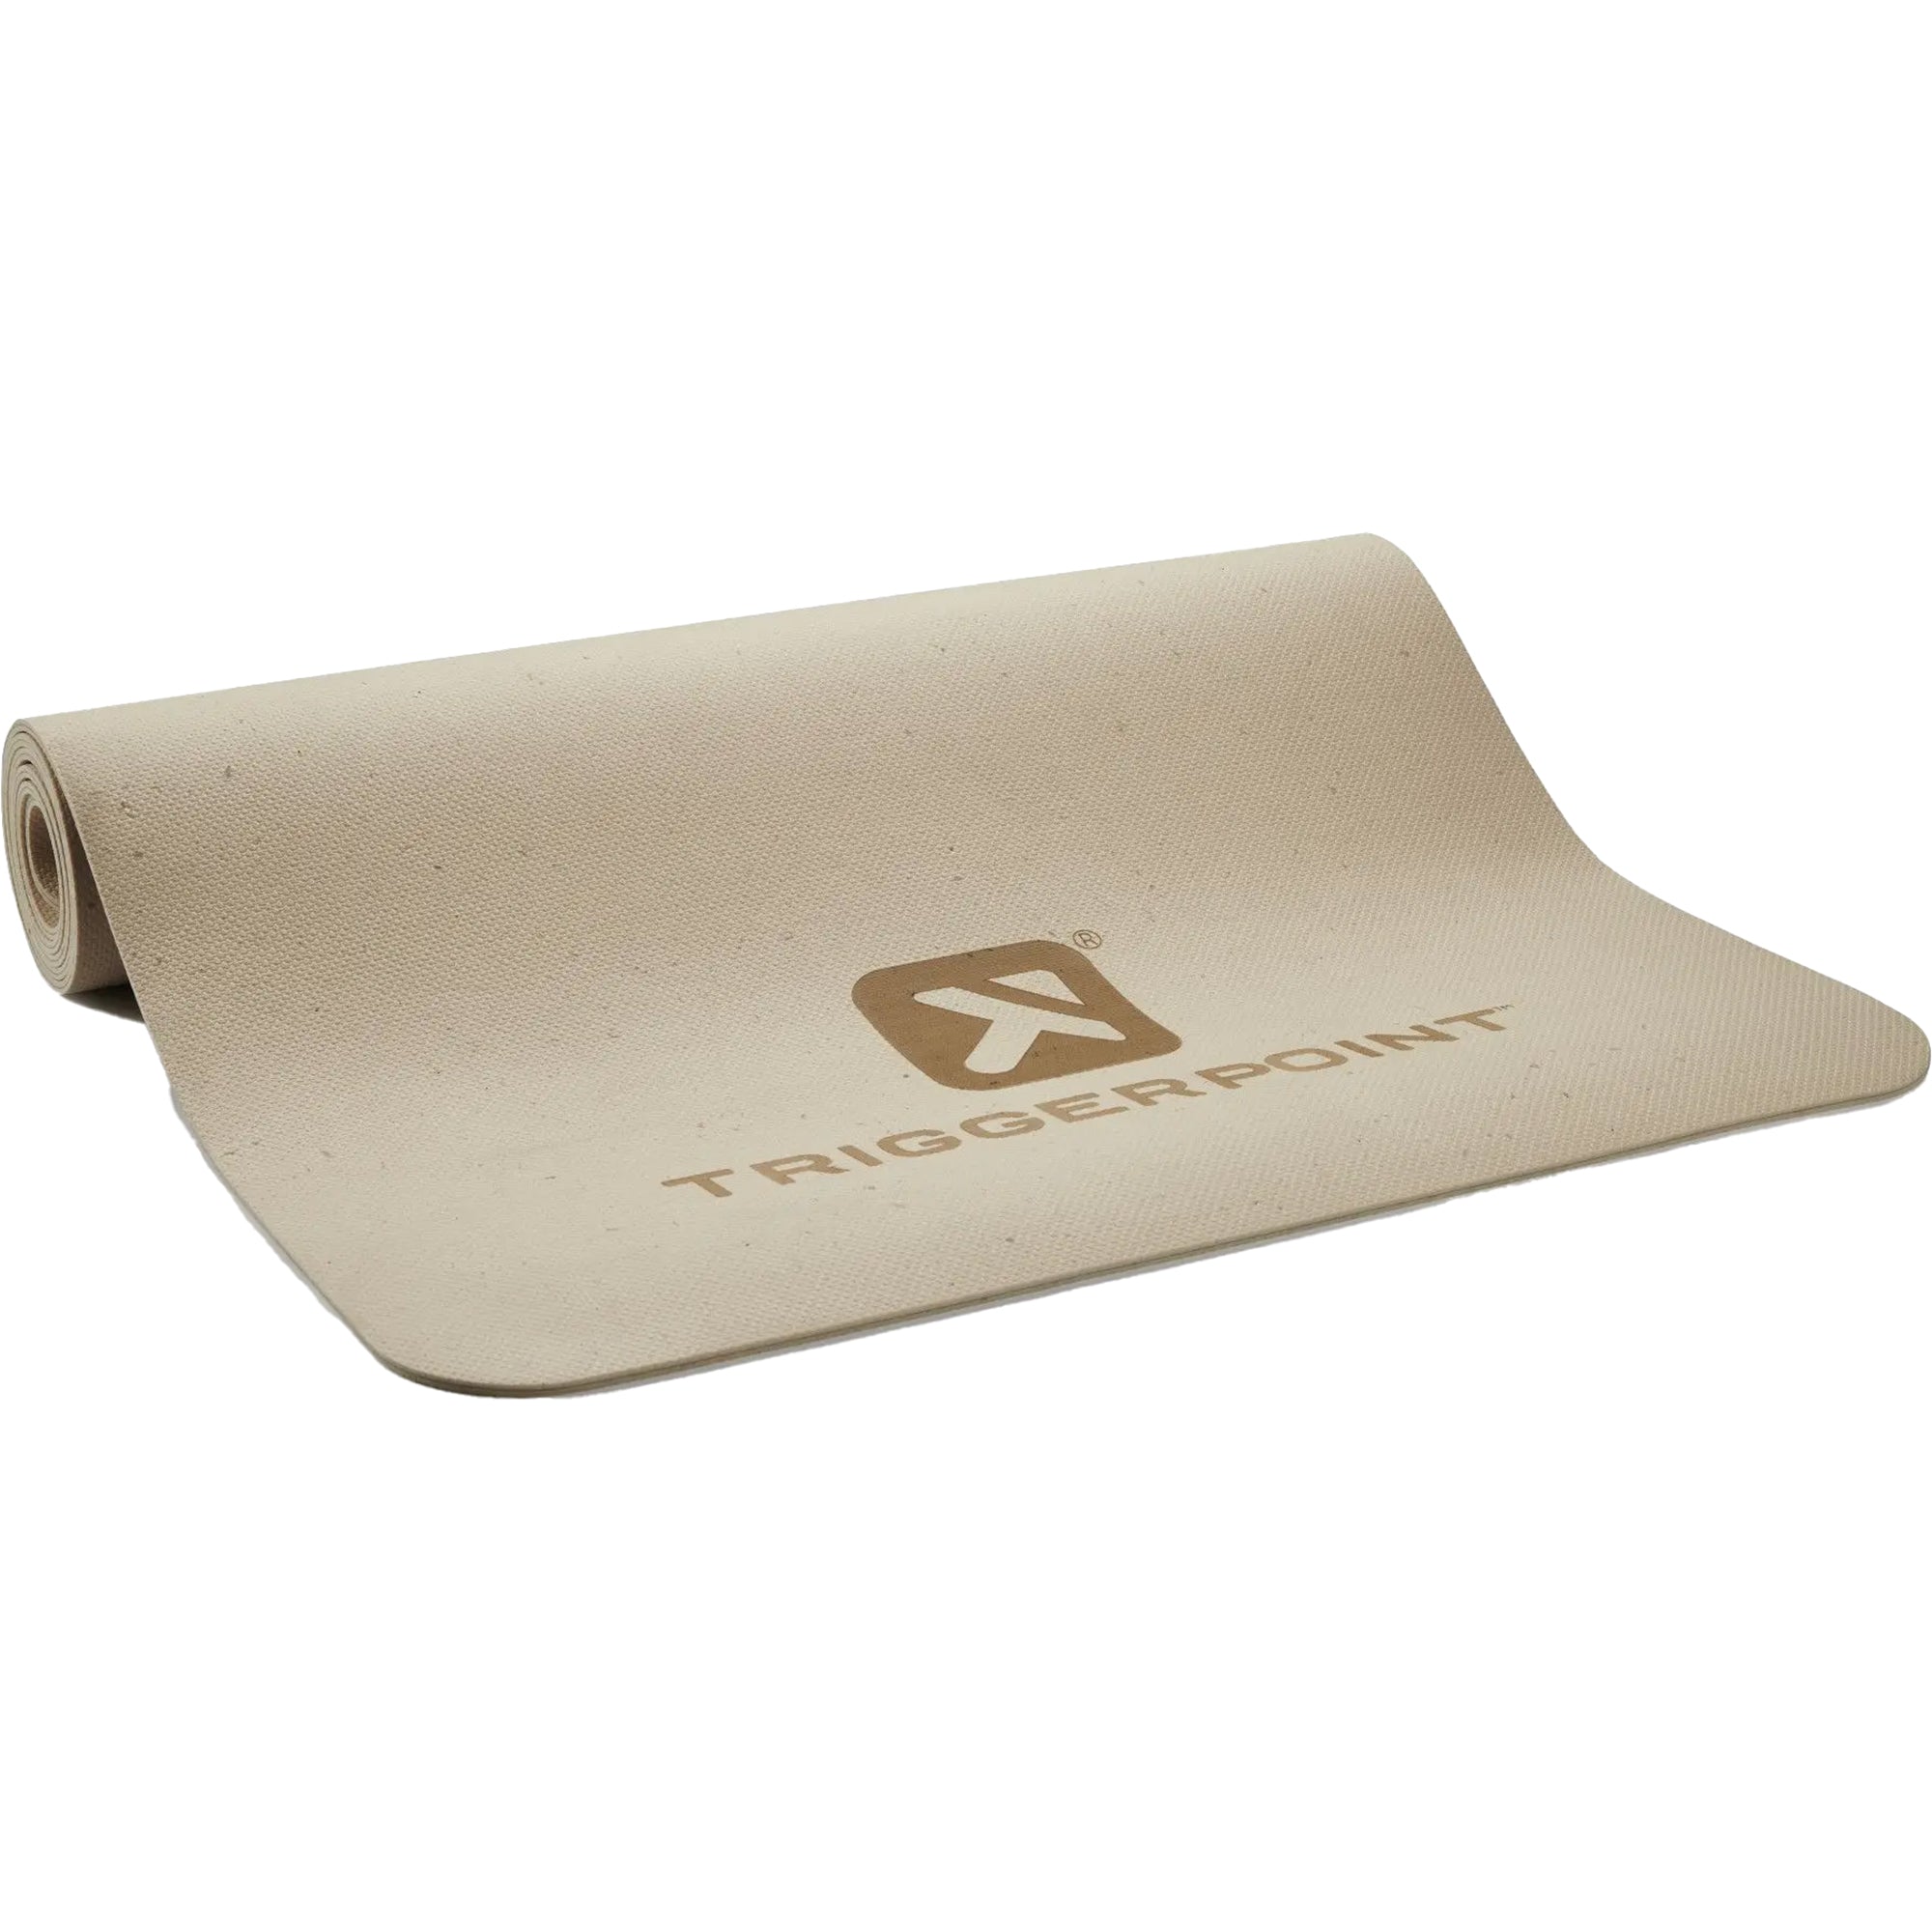 TriggerPoint Eco 5mm Yoga and Exercise Mat - 72" x 24" TriggerPoint